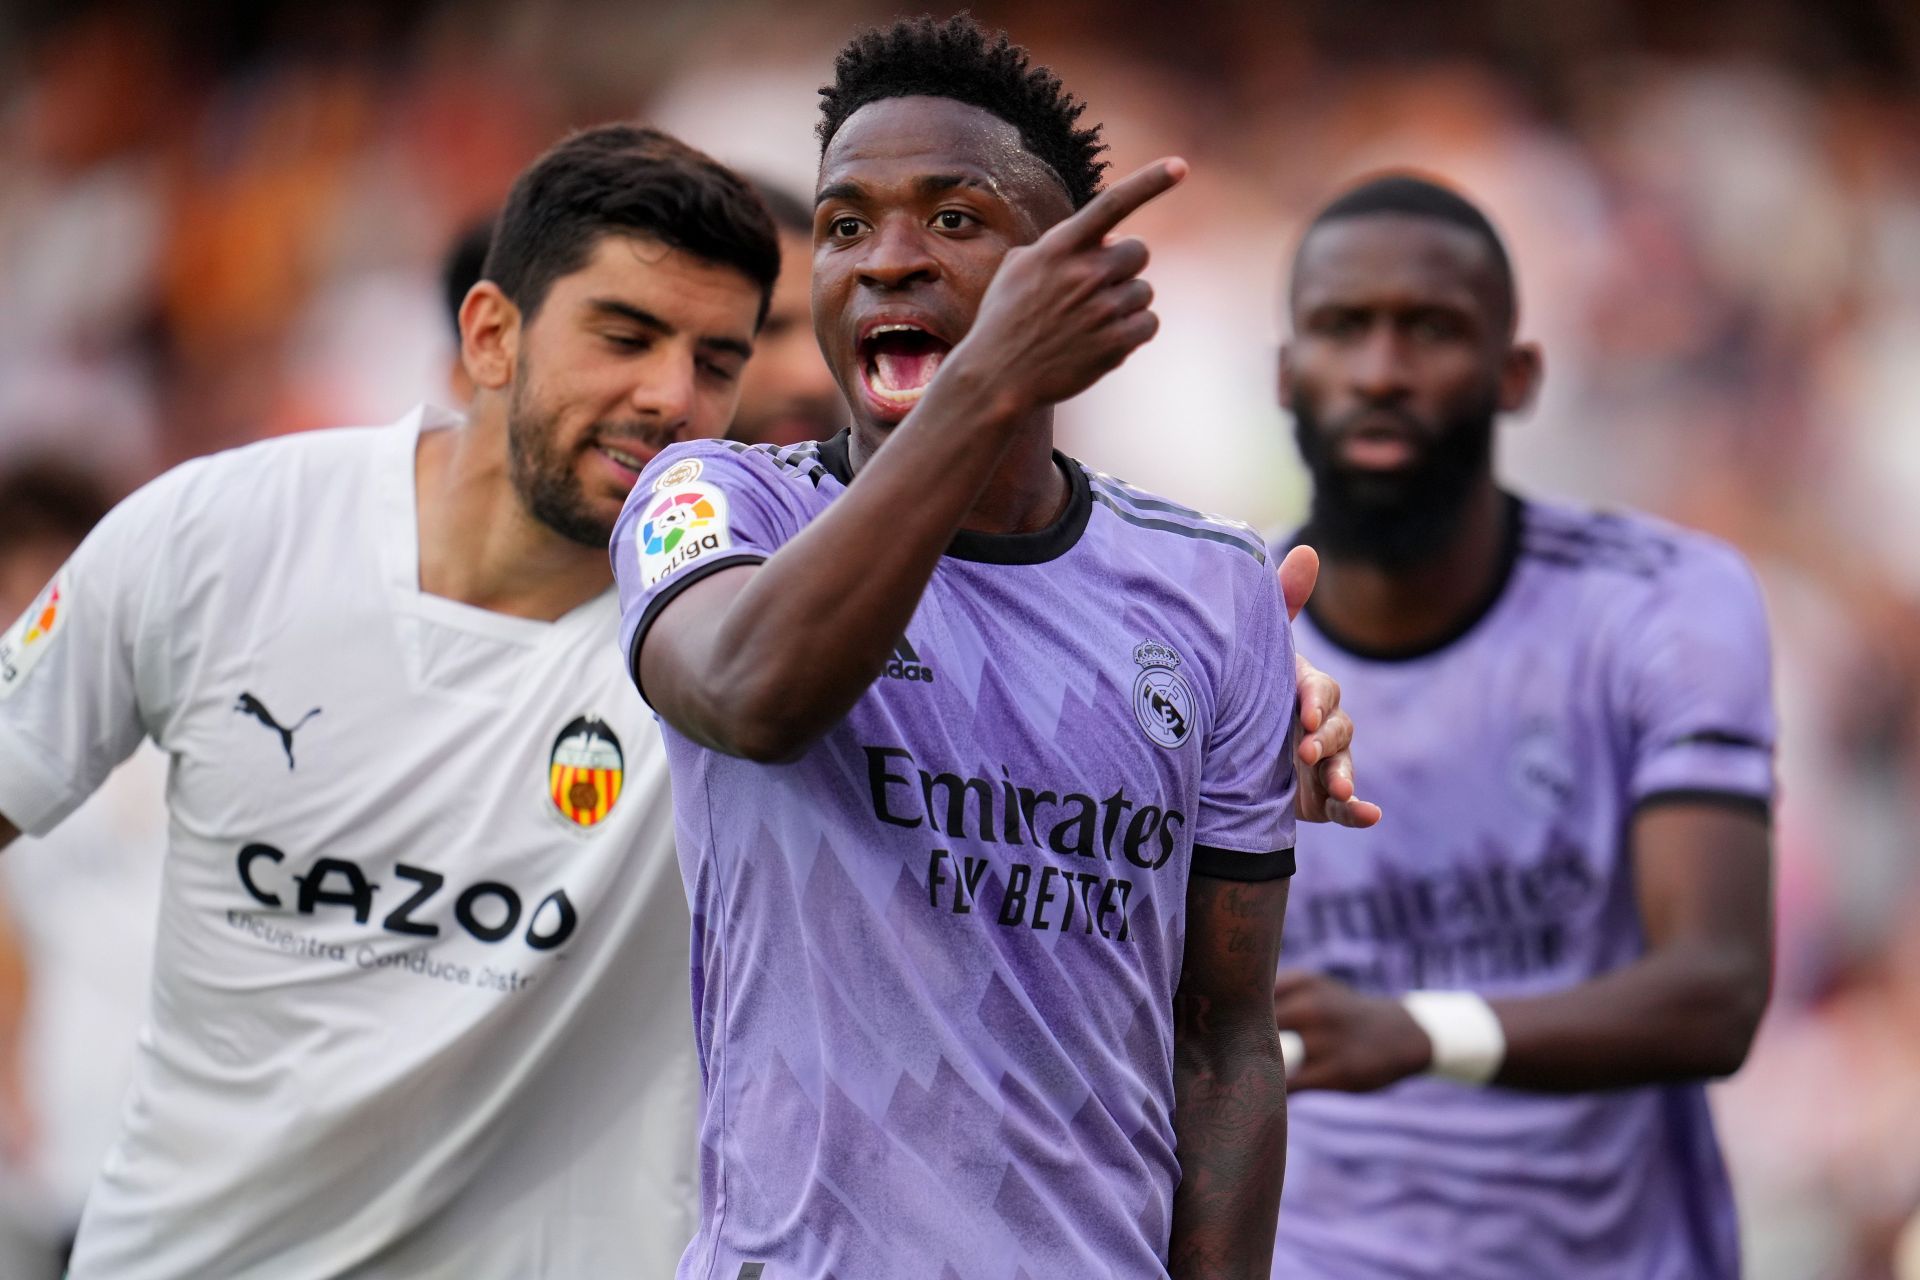 The Madrid attacker has been targeted with racist abuse in La Liga.